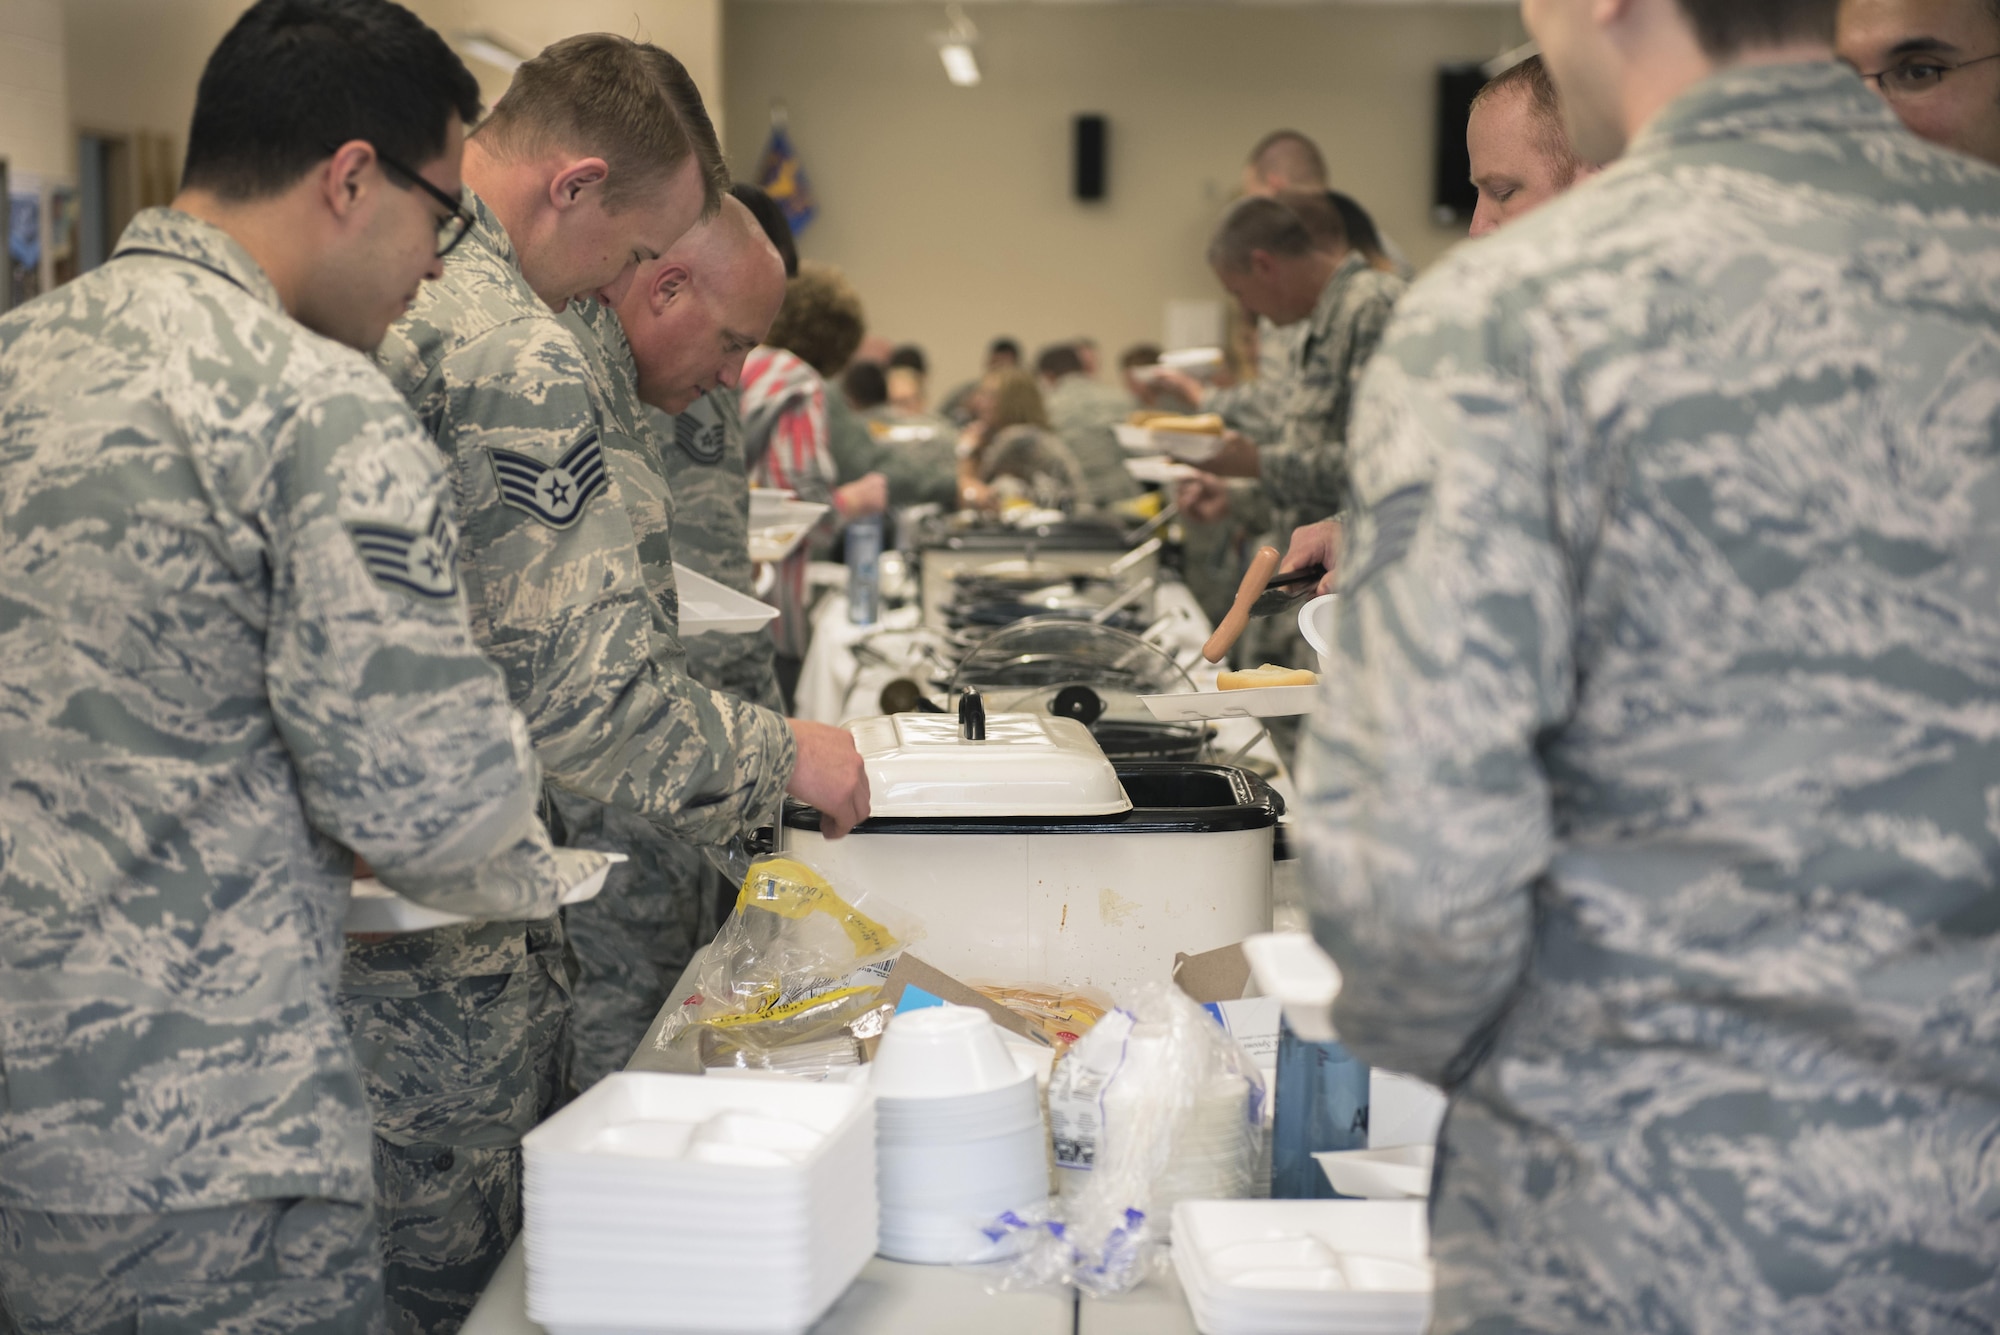 Airmen with the 182nd Airlift Wing, Illinois Air National Guard, examine chilies at the wing’s ninth-annual chili cook-off in Peoria, Ill., May 17, 2017. Staff Sgt. Nicholas Freeman, an aerospace maintenance journeyman with the 182nd Aircraft Maintenance Squadron, Illinois Air National Guard, won first place in overall points, first place for consistency and tied for second place in the People’s Choice vote against 13 other chilies. (U.S. Air National Guard photo by Tech. Sgt. Lealan Buehrer)